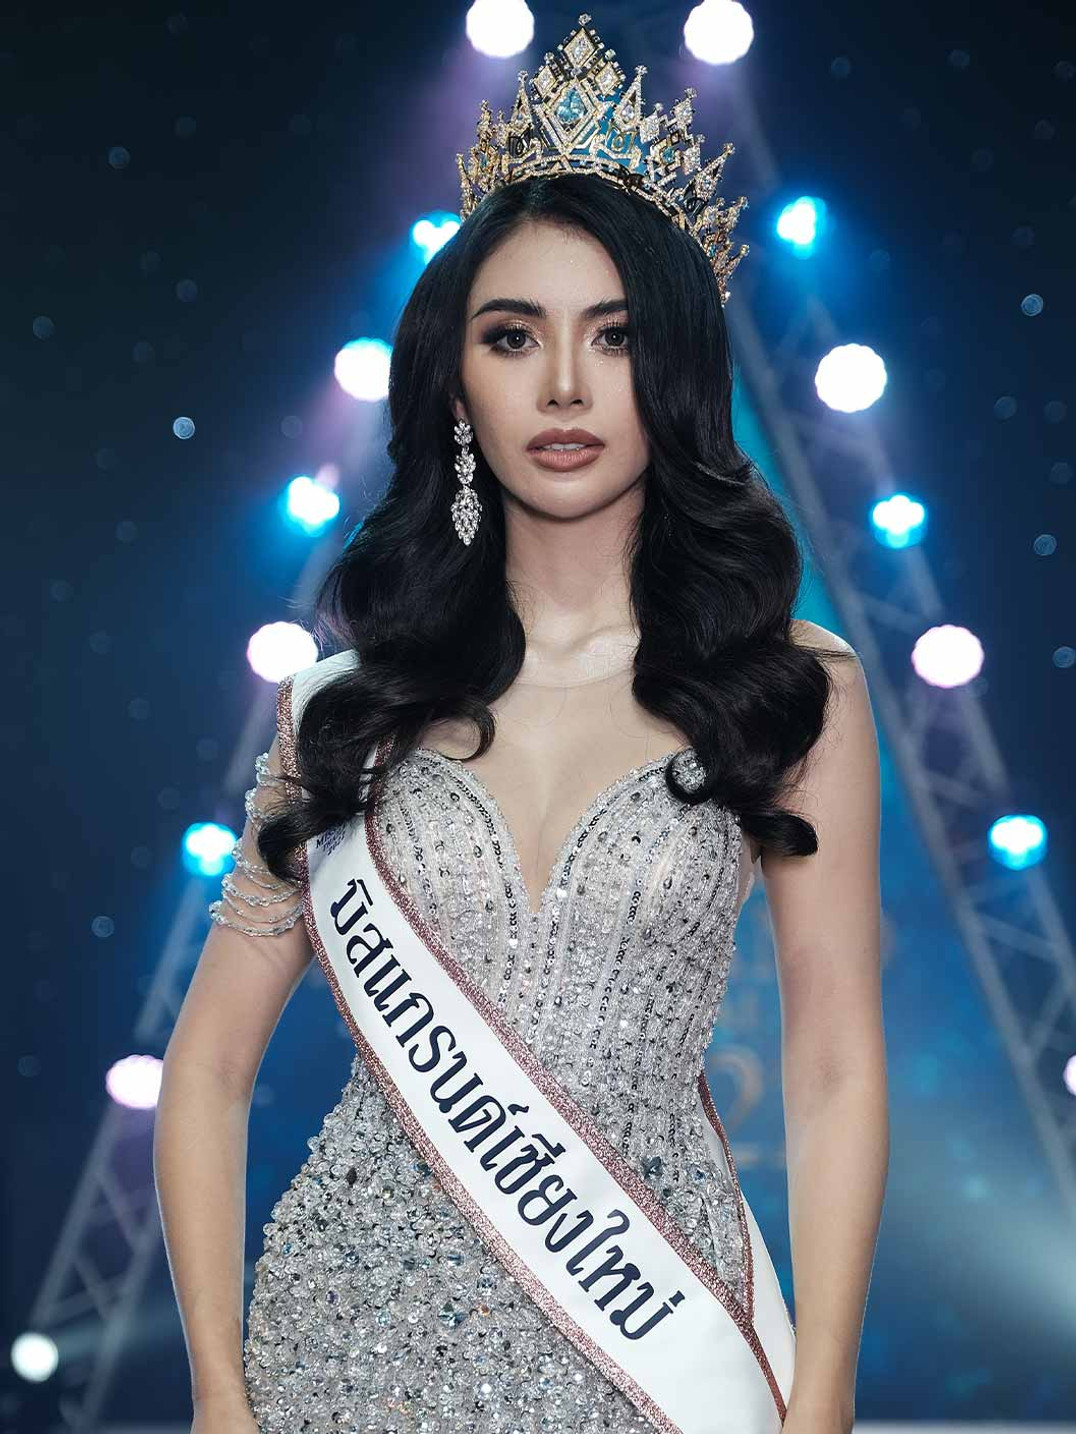 candidatas a miss grand thailand 2022. final: 30 abril. MGVLGe